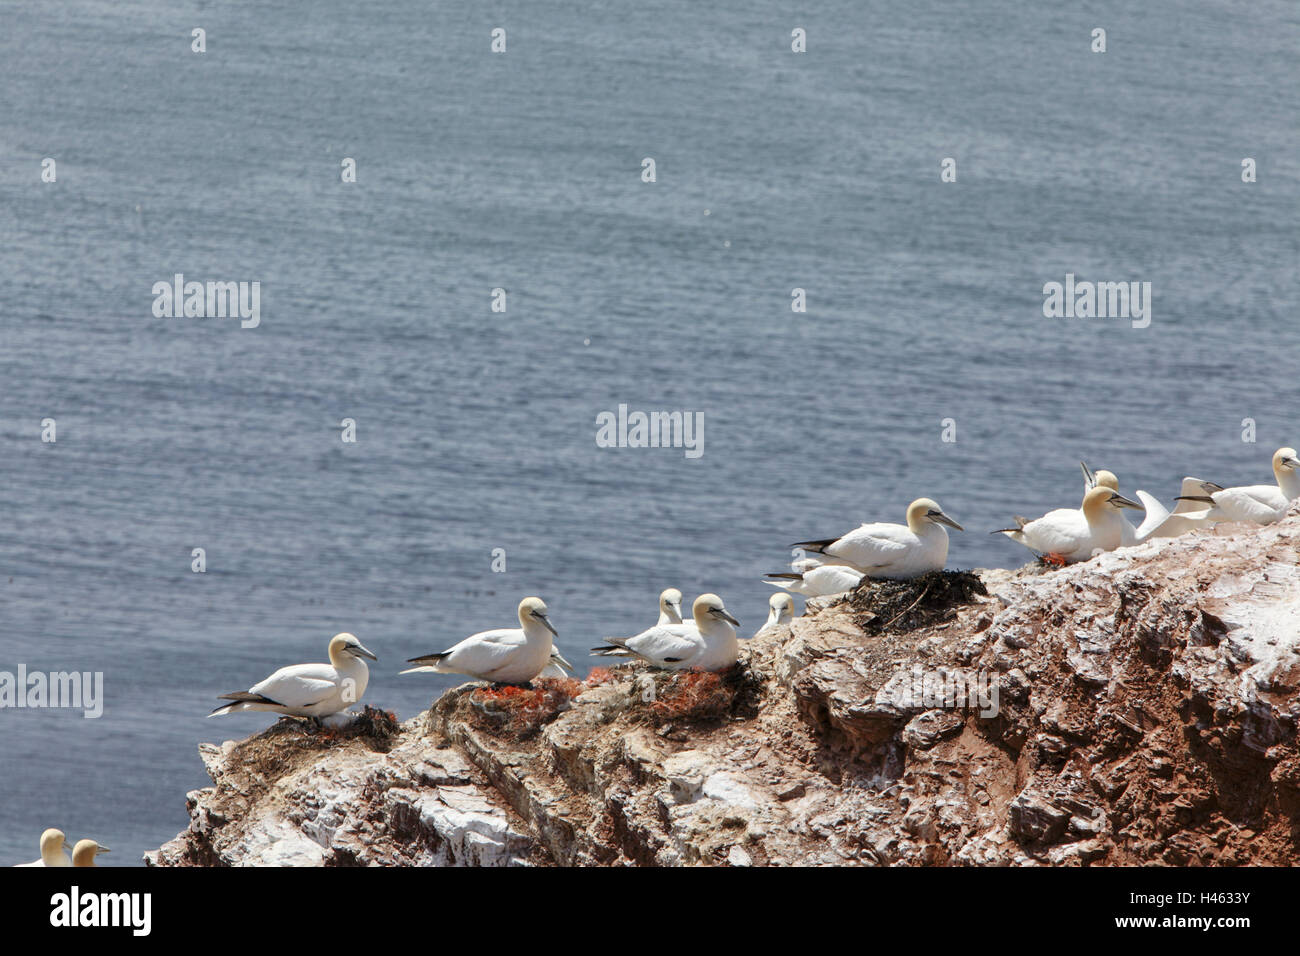 Helgoland, rock, guillemots, Germany, Schleswig - Holstein, the North Sea, island, ocean-going island, high sea, ocean-going climate, waters, sea, bird's rock, guillemot rock, new red sandstone, rock, brown, red, idiot's guillemots, birds, sea birds, nest, nesting place, brood, sit, rest, protection, nature, nature reserve, Stock Photo